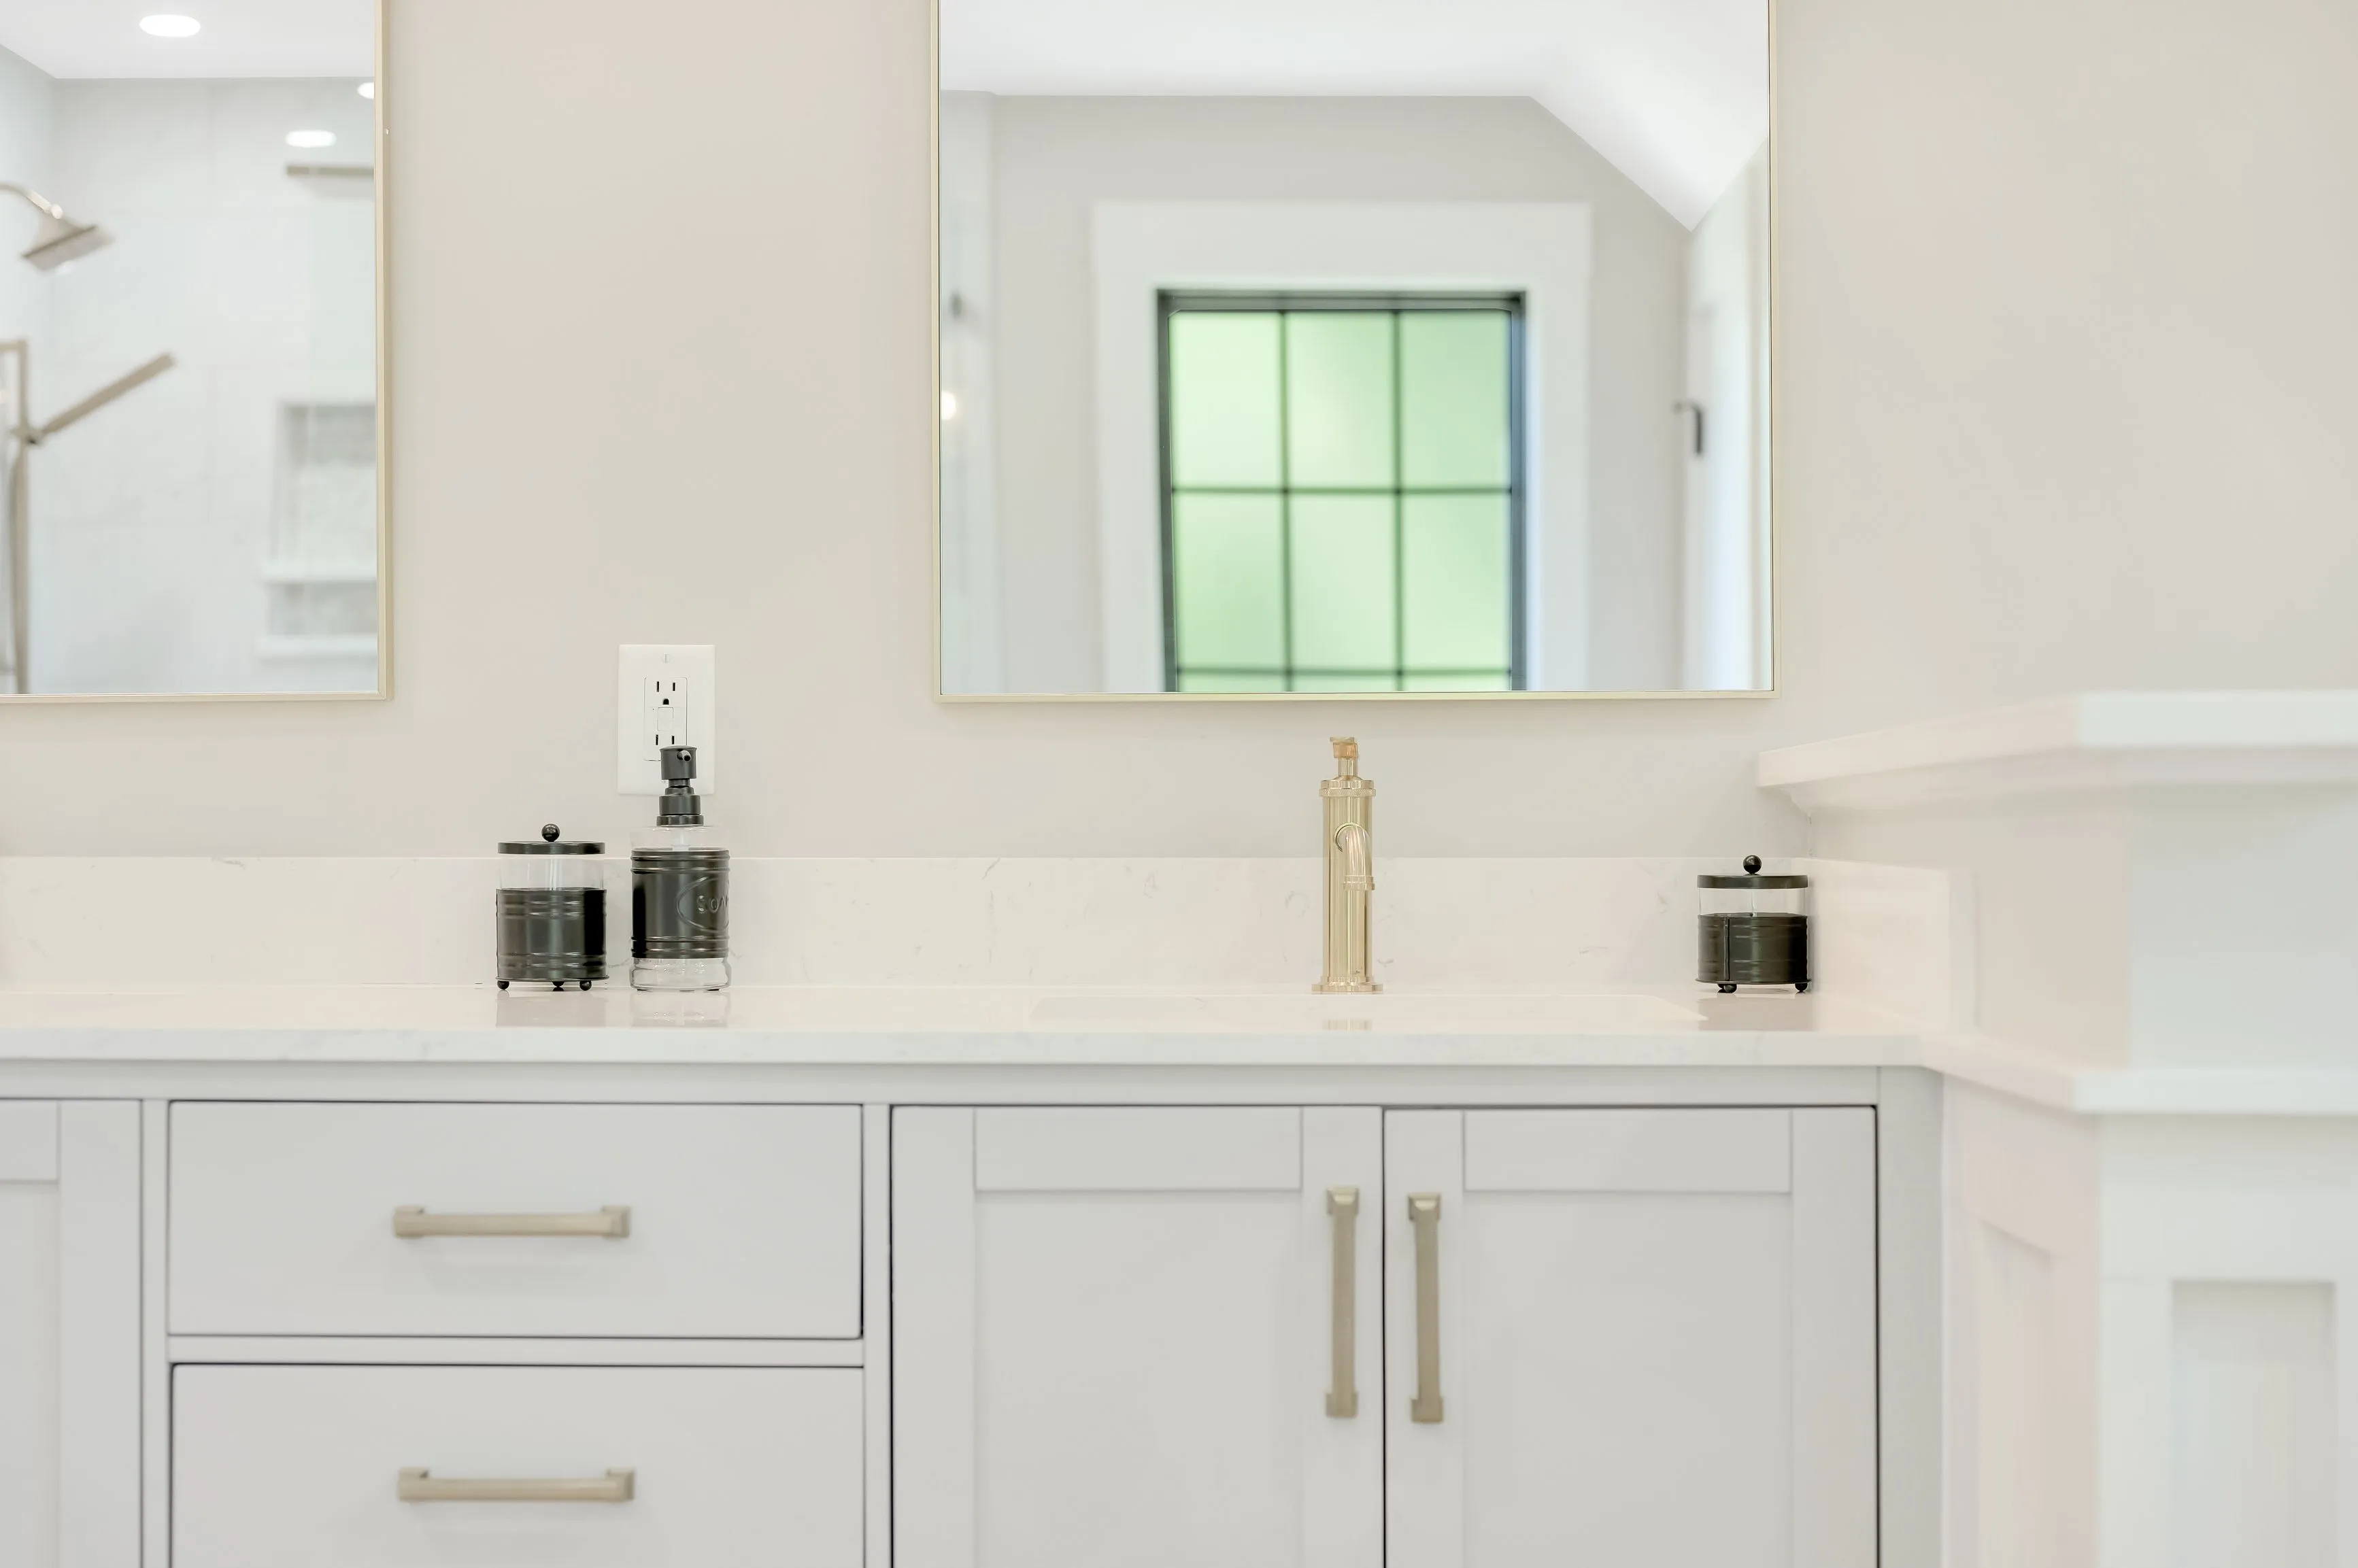 Elegant bathroom vanity with marble countertop, white cabinetry, and a large framed mirror reflecting a window.